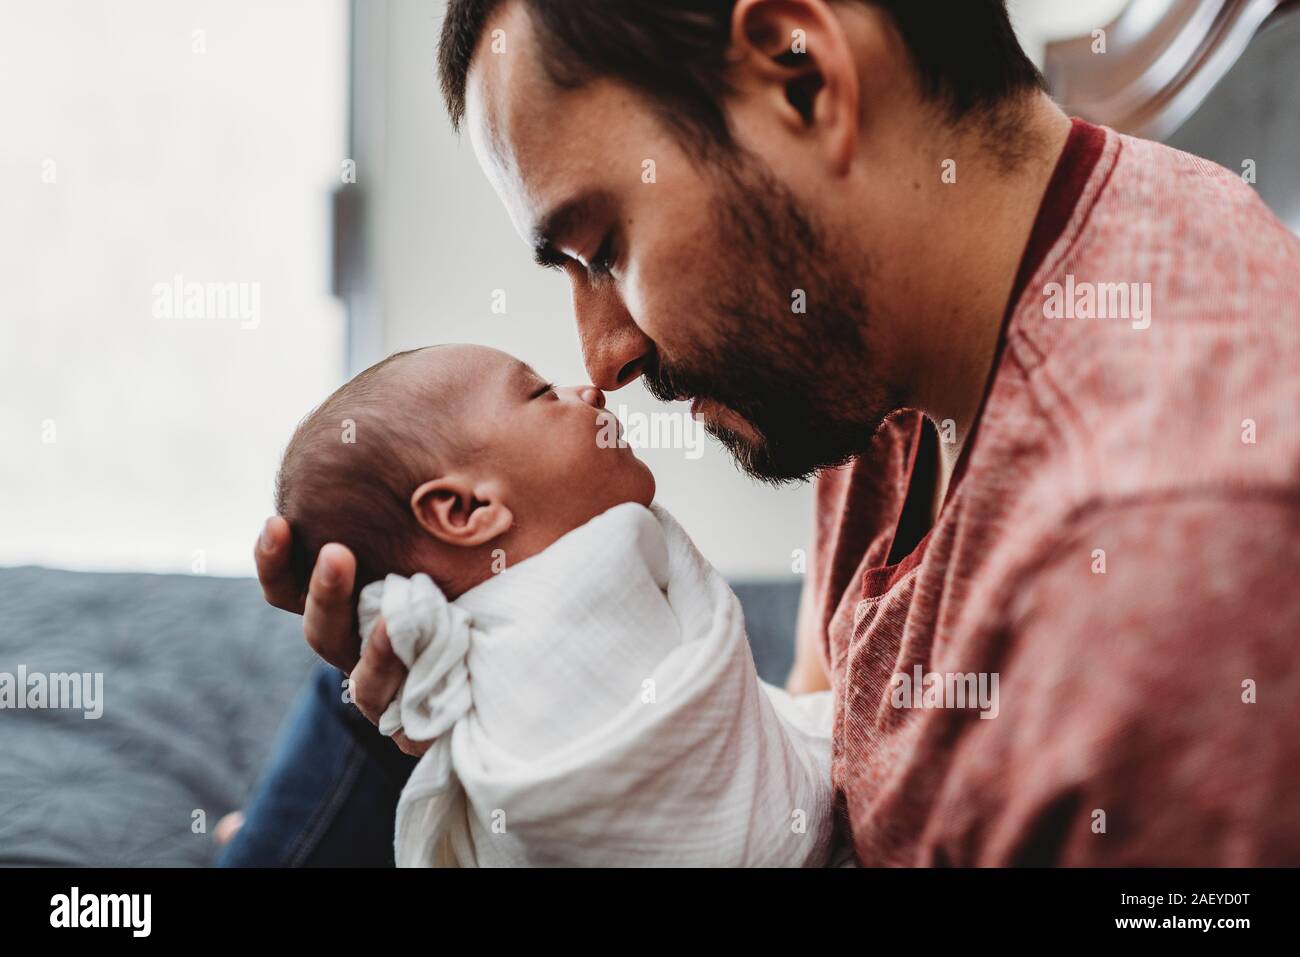 Olive-skinned dad with beard touches nose to swaddled newborn Stock Photo